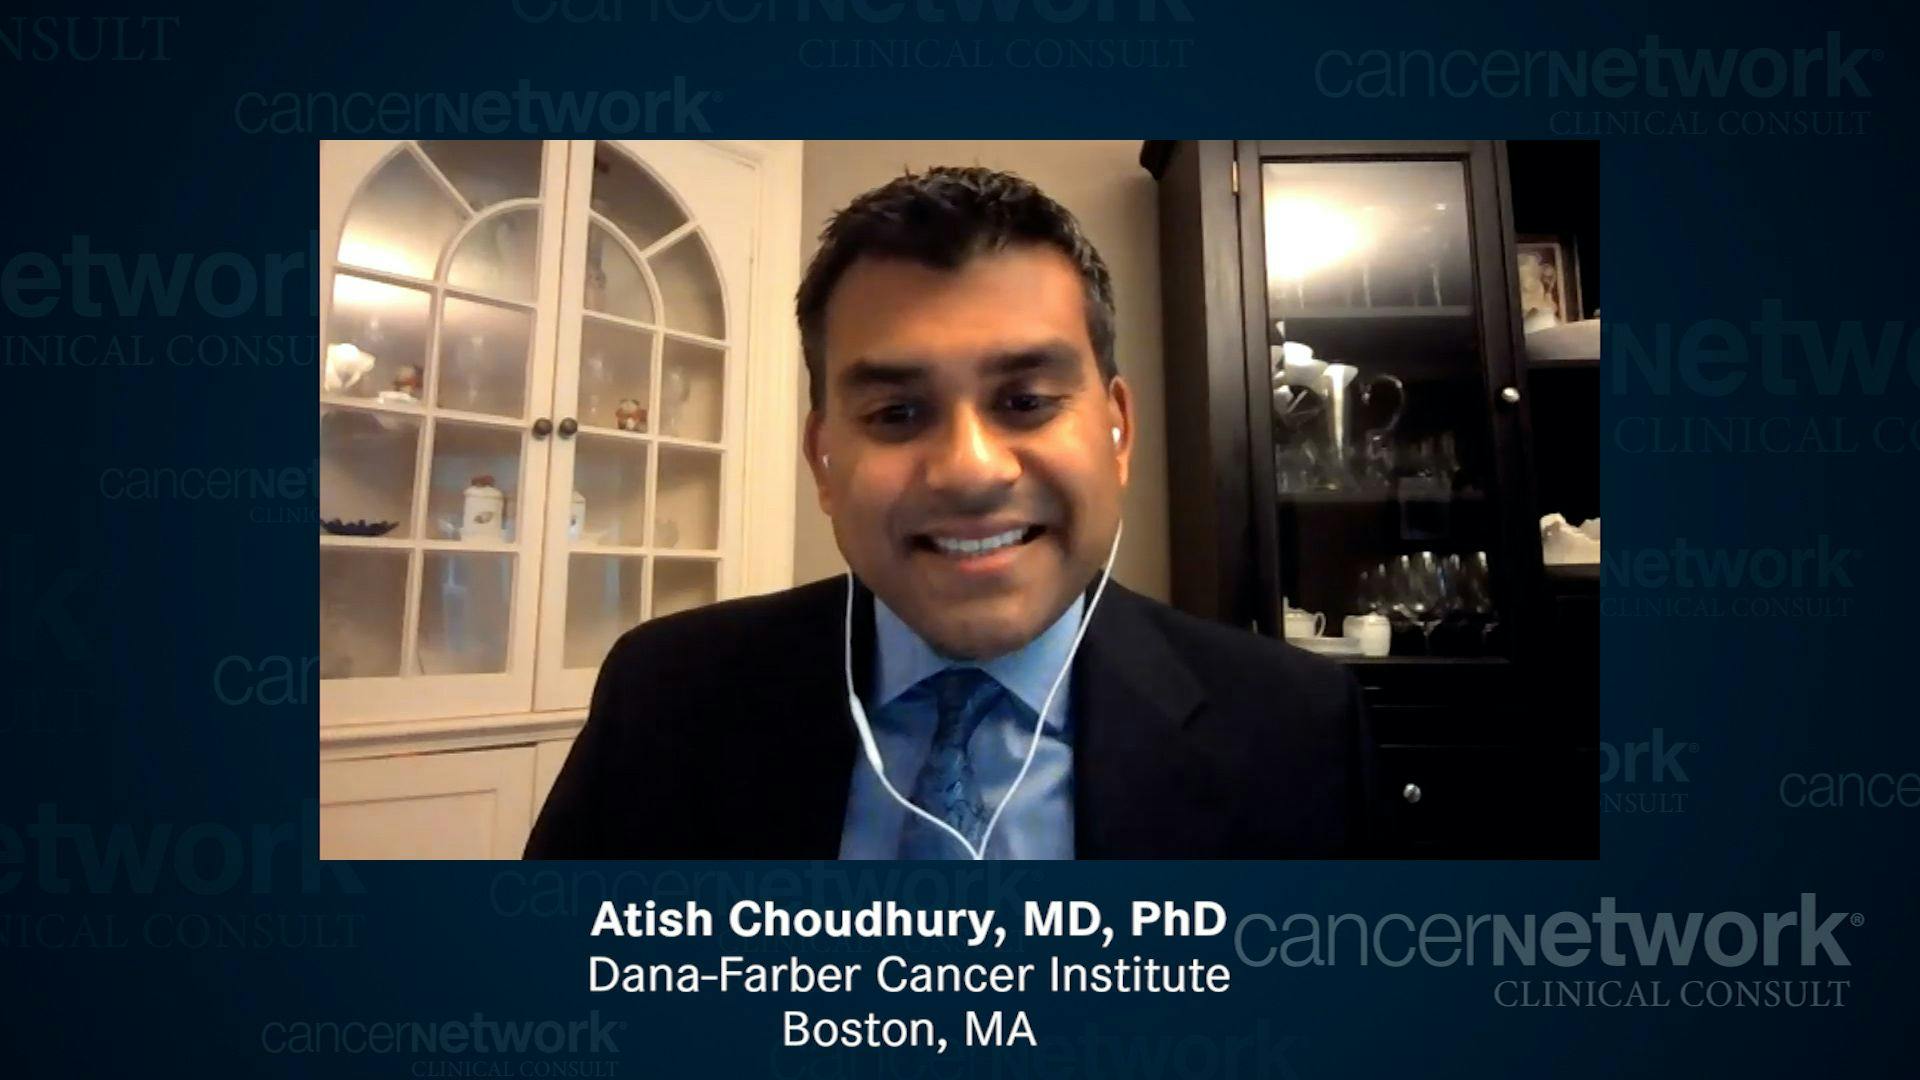 Trends in Prostate Cancer Care